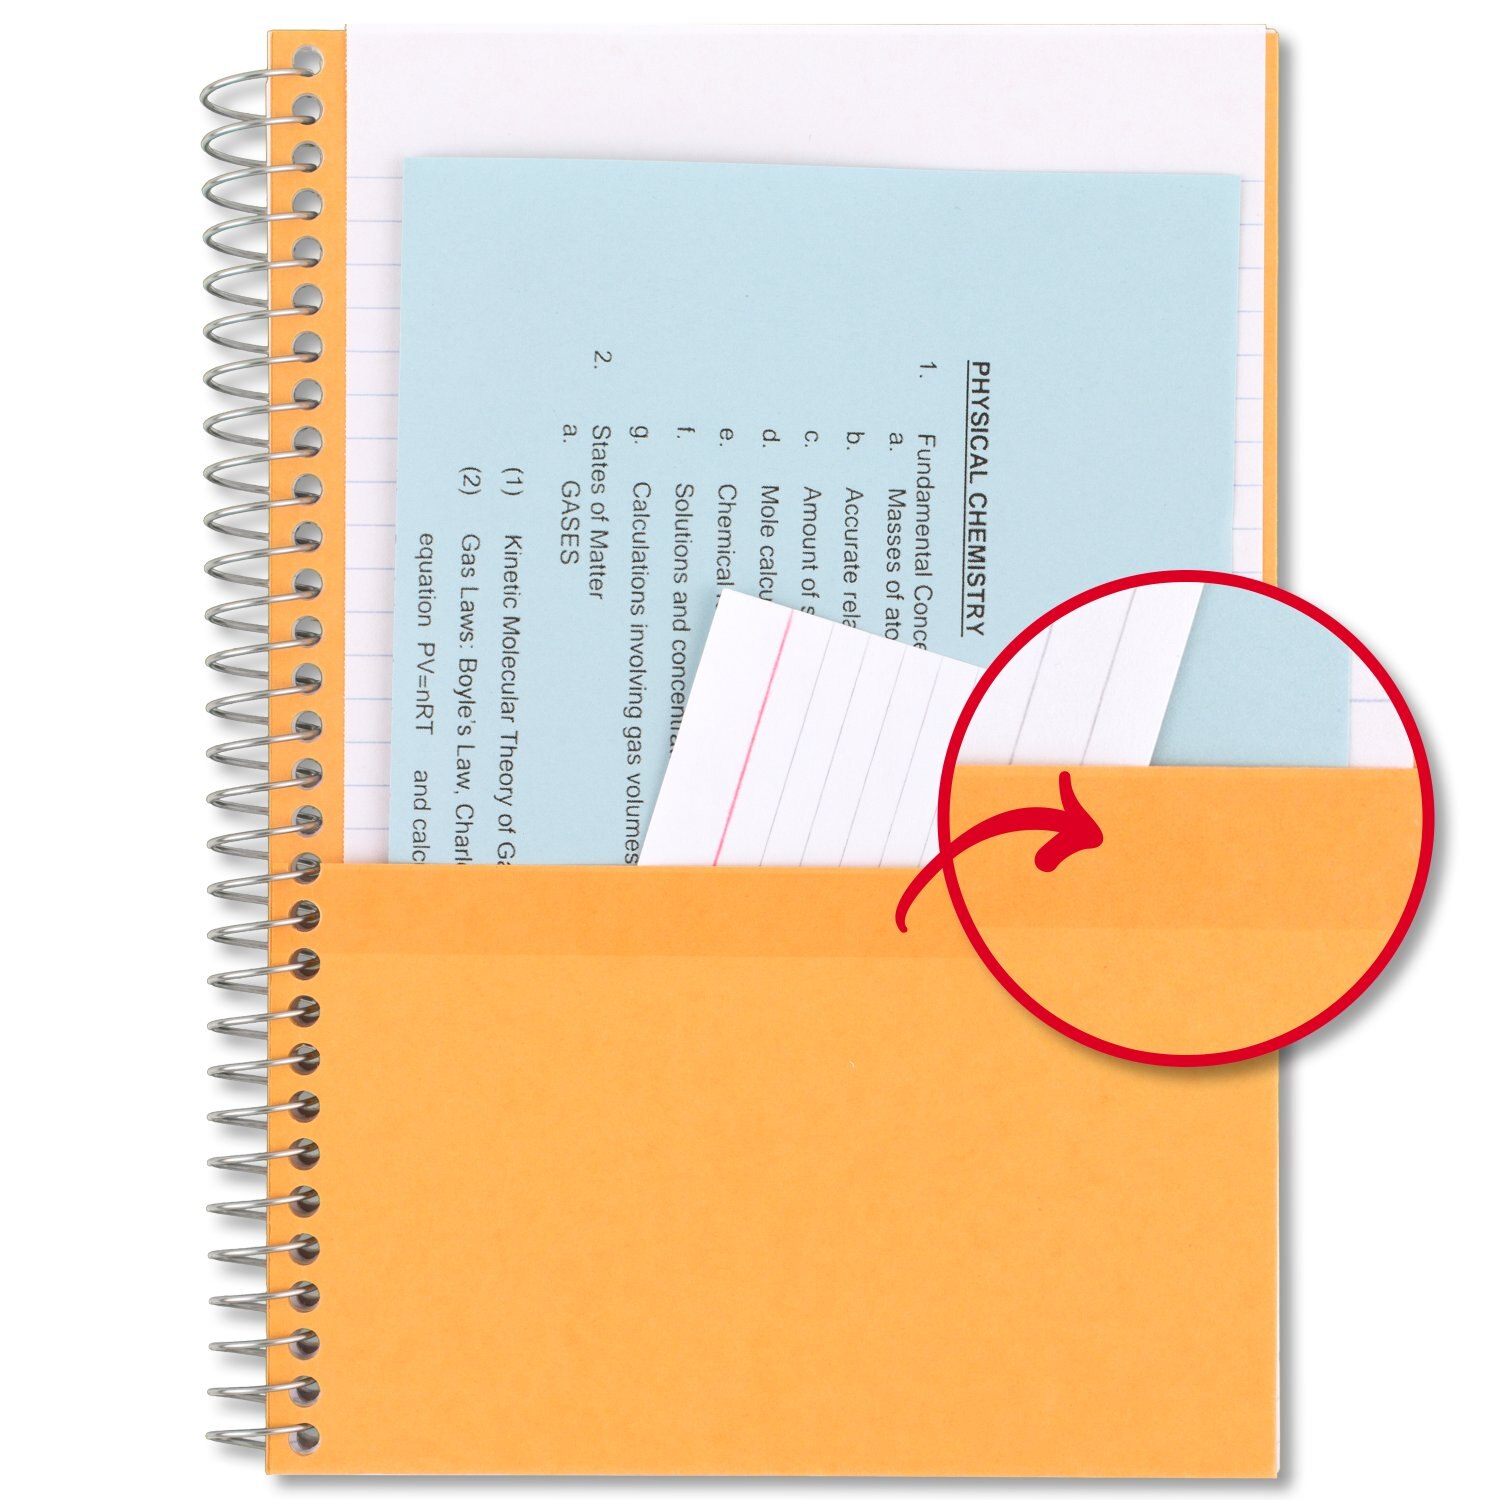 Five Star 3 Subject Recycled Notebook - Blue